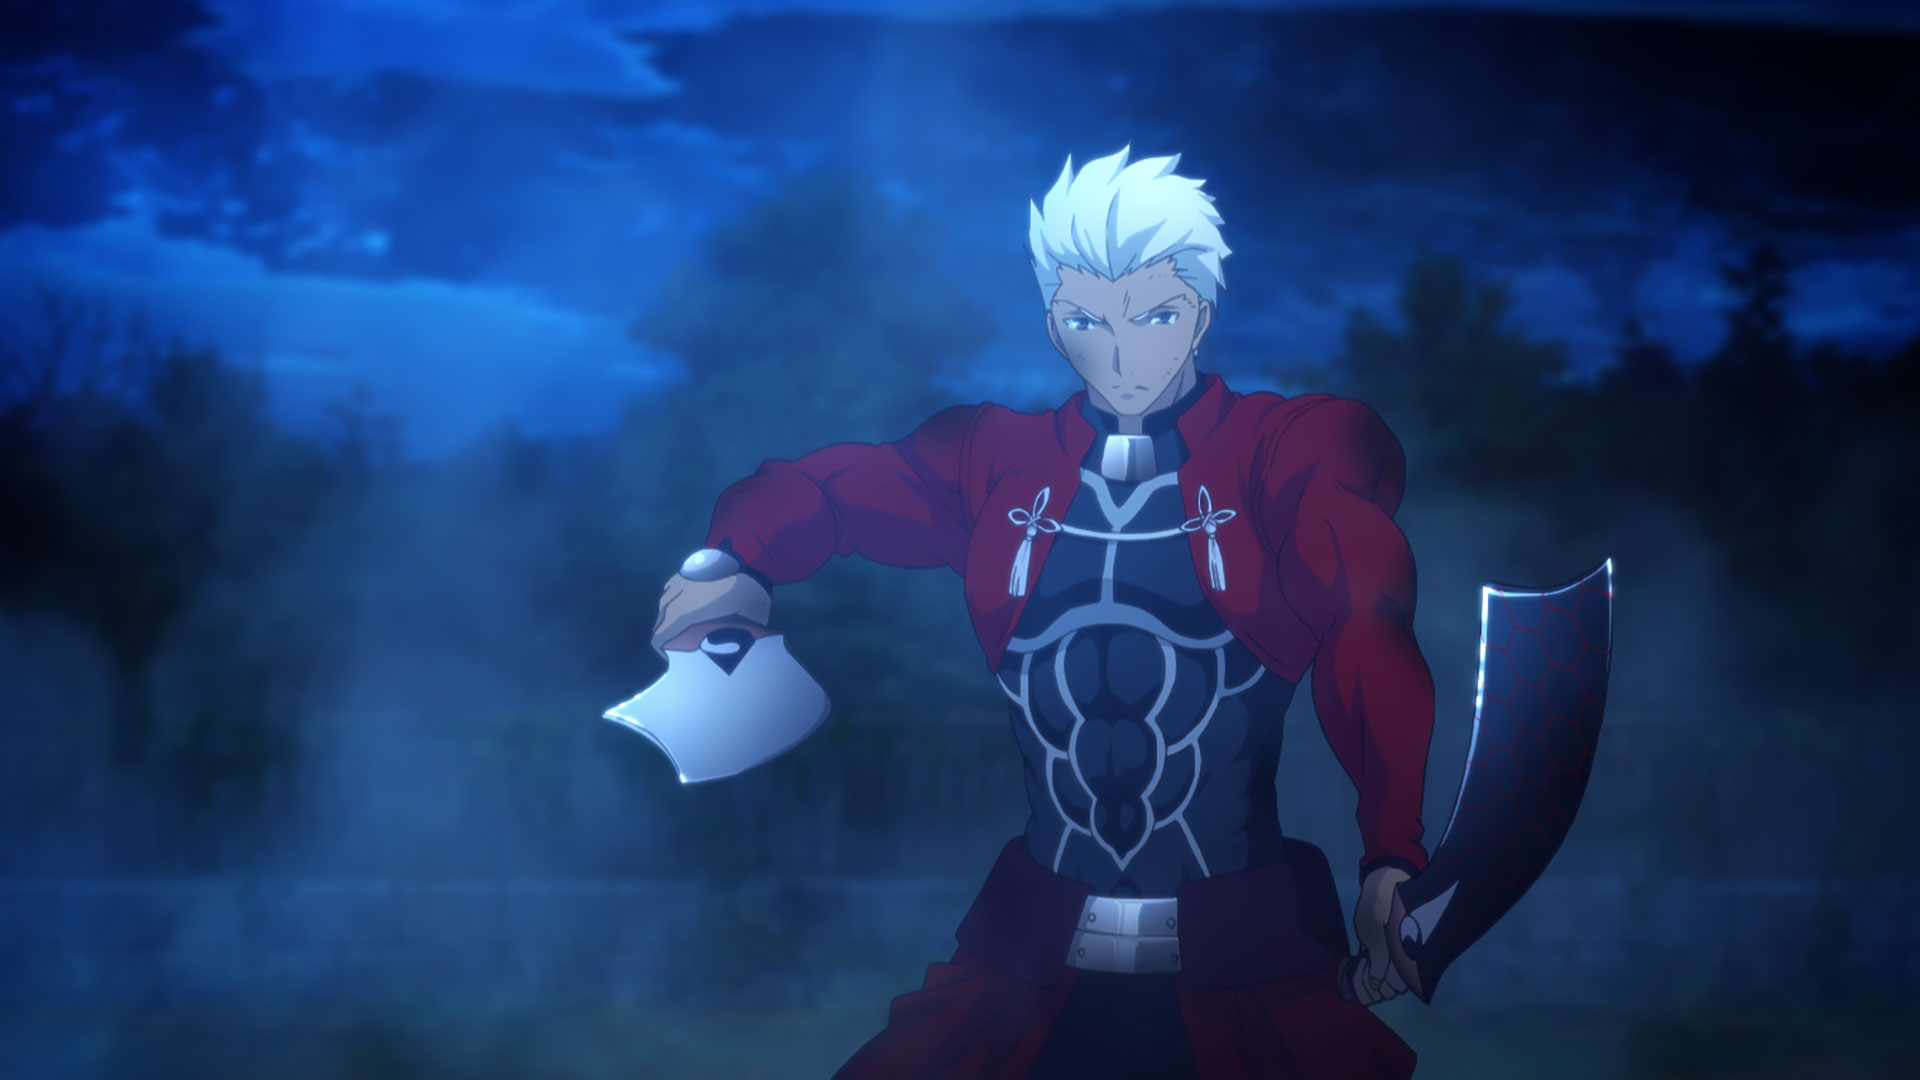 TVアニメ「Fate/stay night [Unlimited Blade Works]」2ndシーズン #17